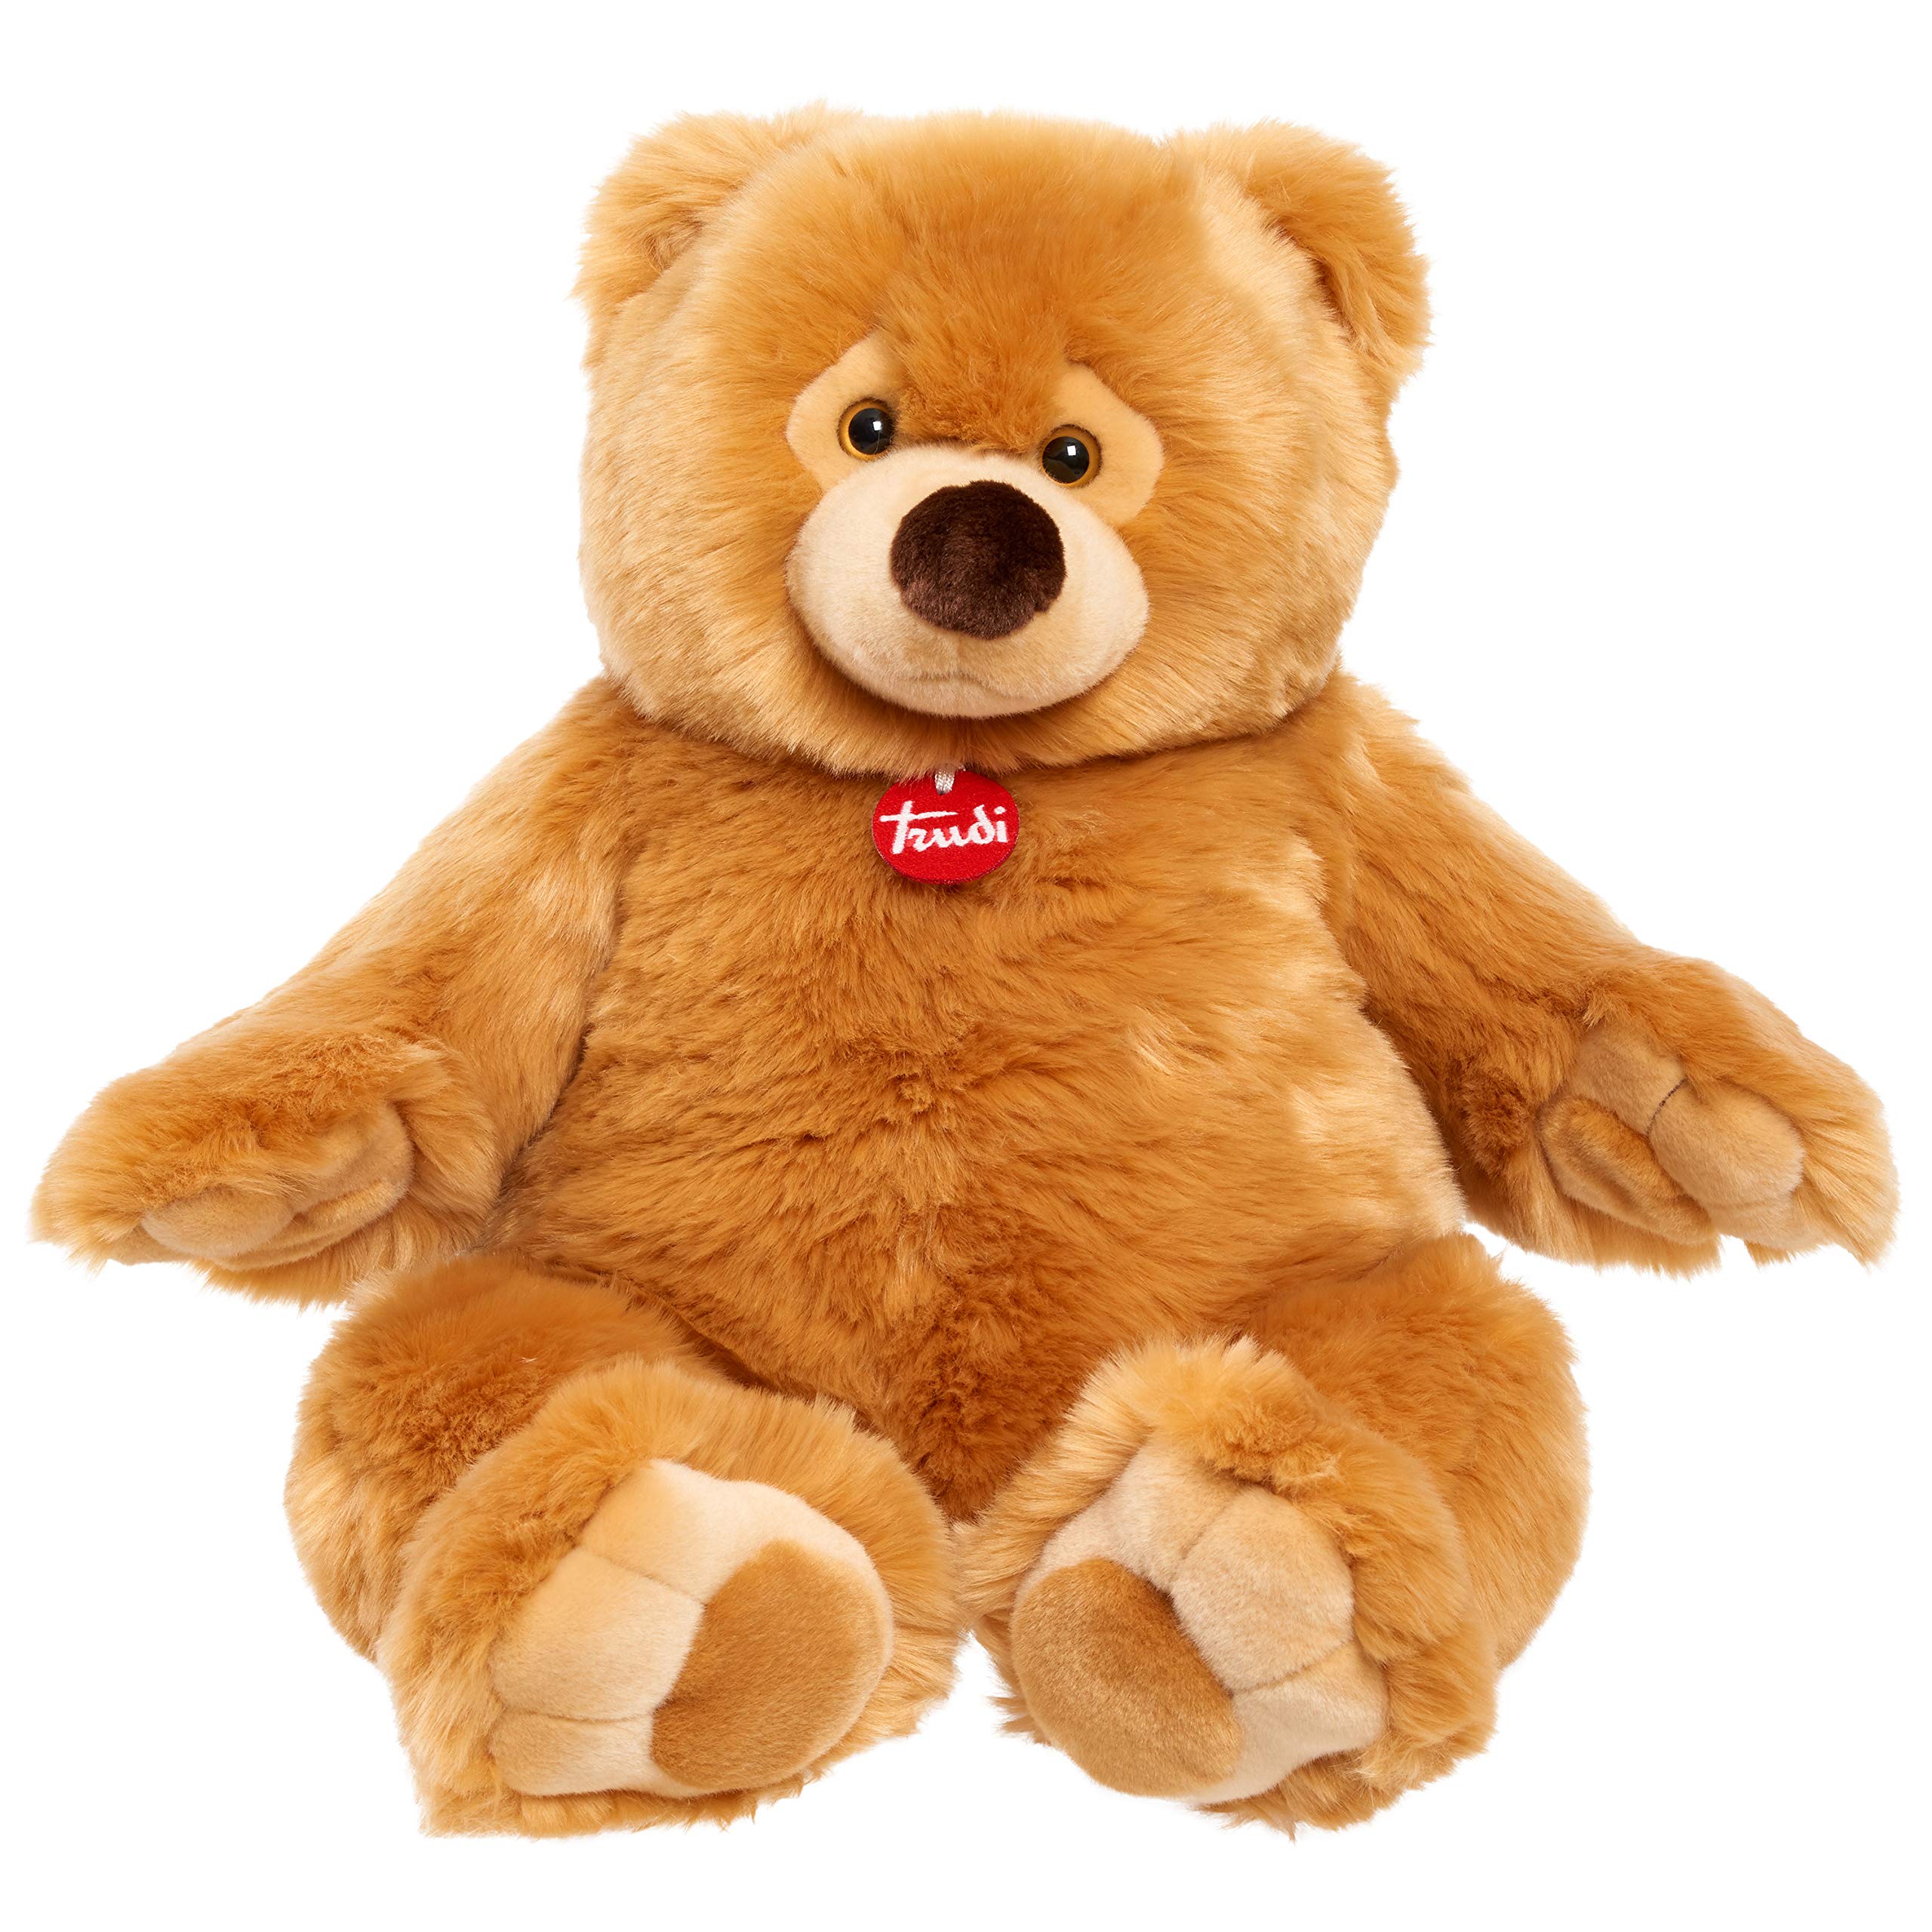 22" Just Play Trudi Ettore Plush Giant Teddy Bear $15.91 + Free Shipping w/ Prime or on $25+